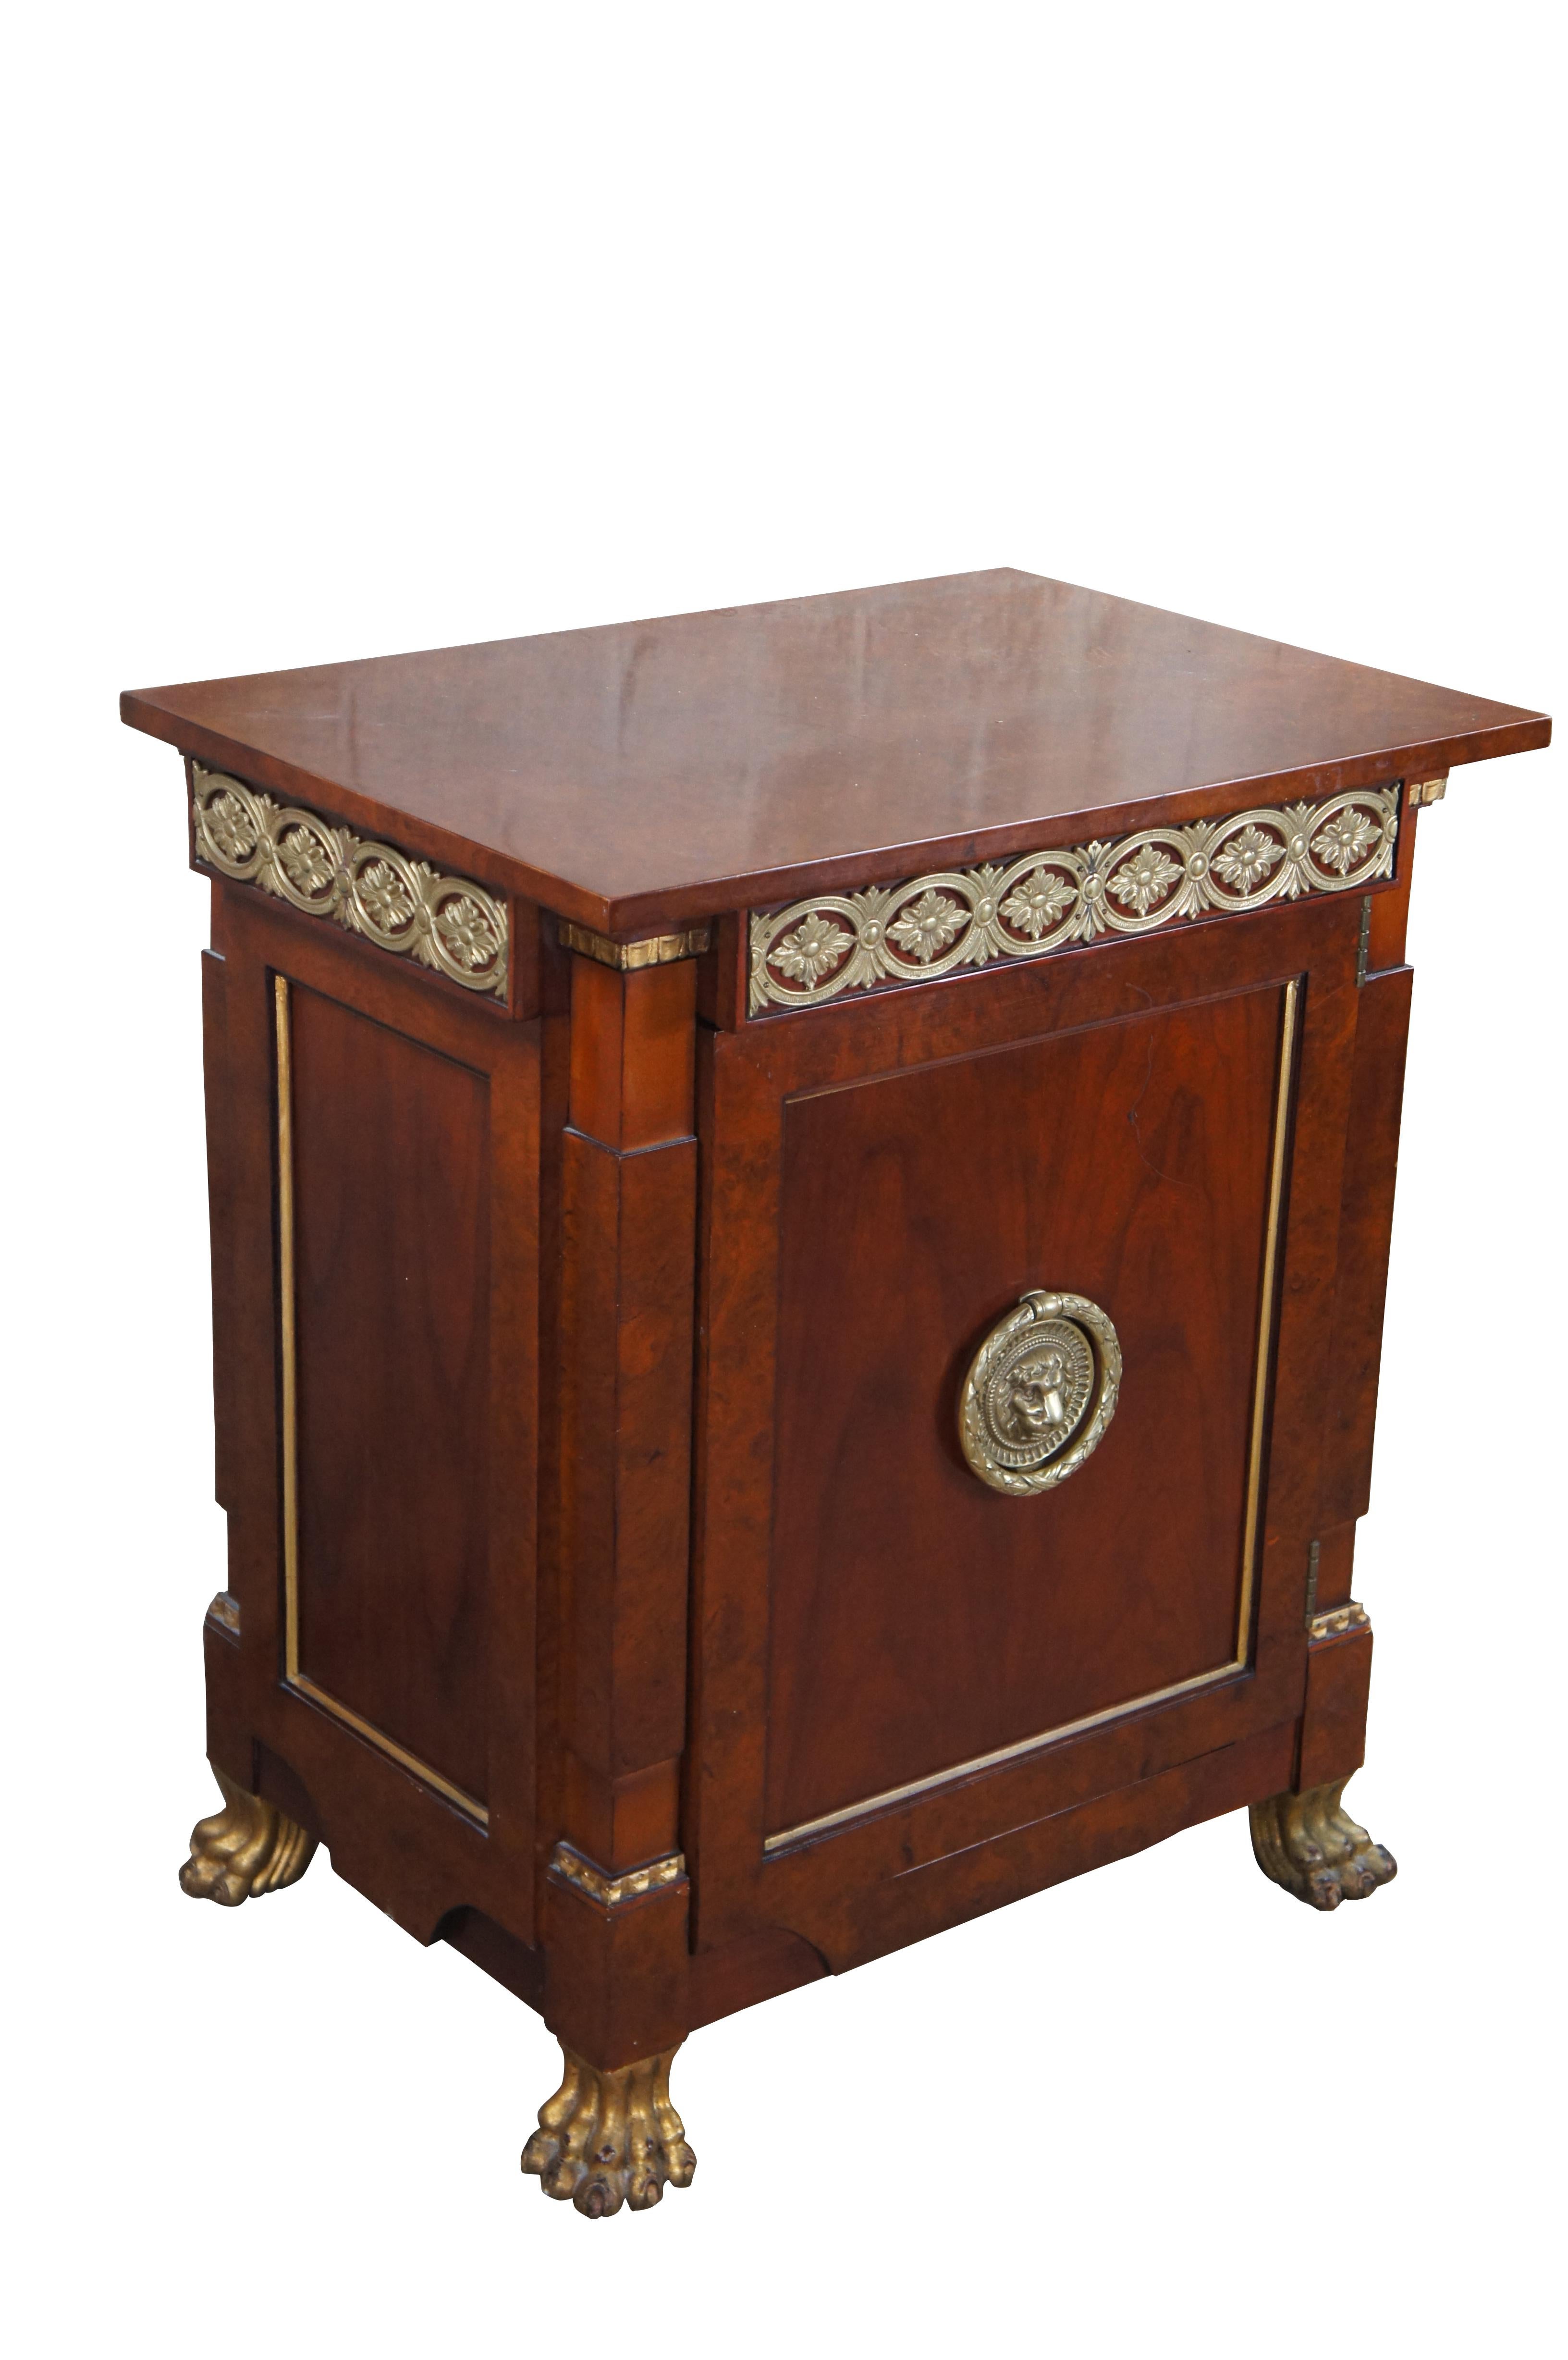 Vintage John Widdicomb Neoclassical Empire Cherry Burl Bedside End Table Cabinet In Good Condition For Sale In Dayton, OH